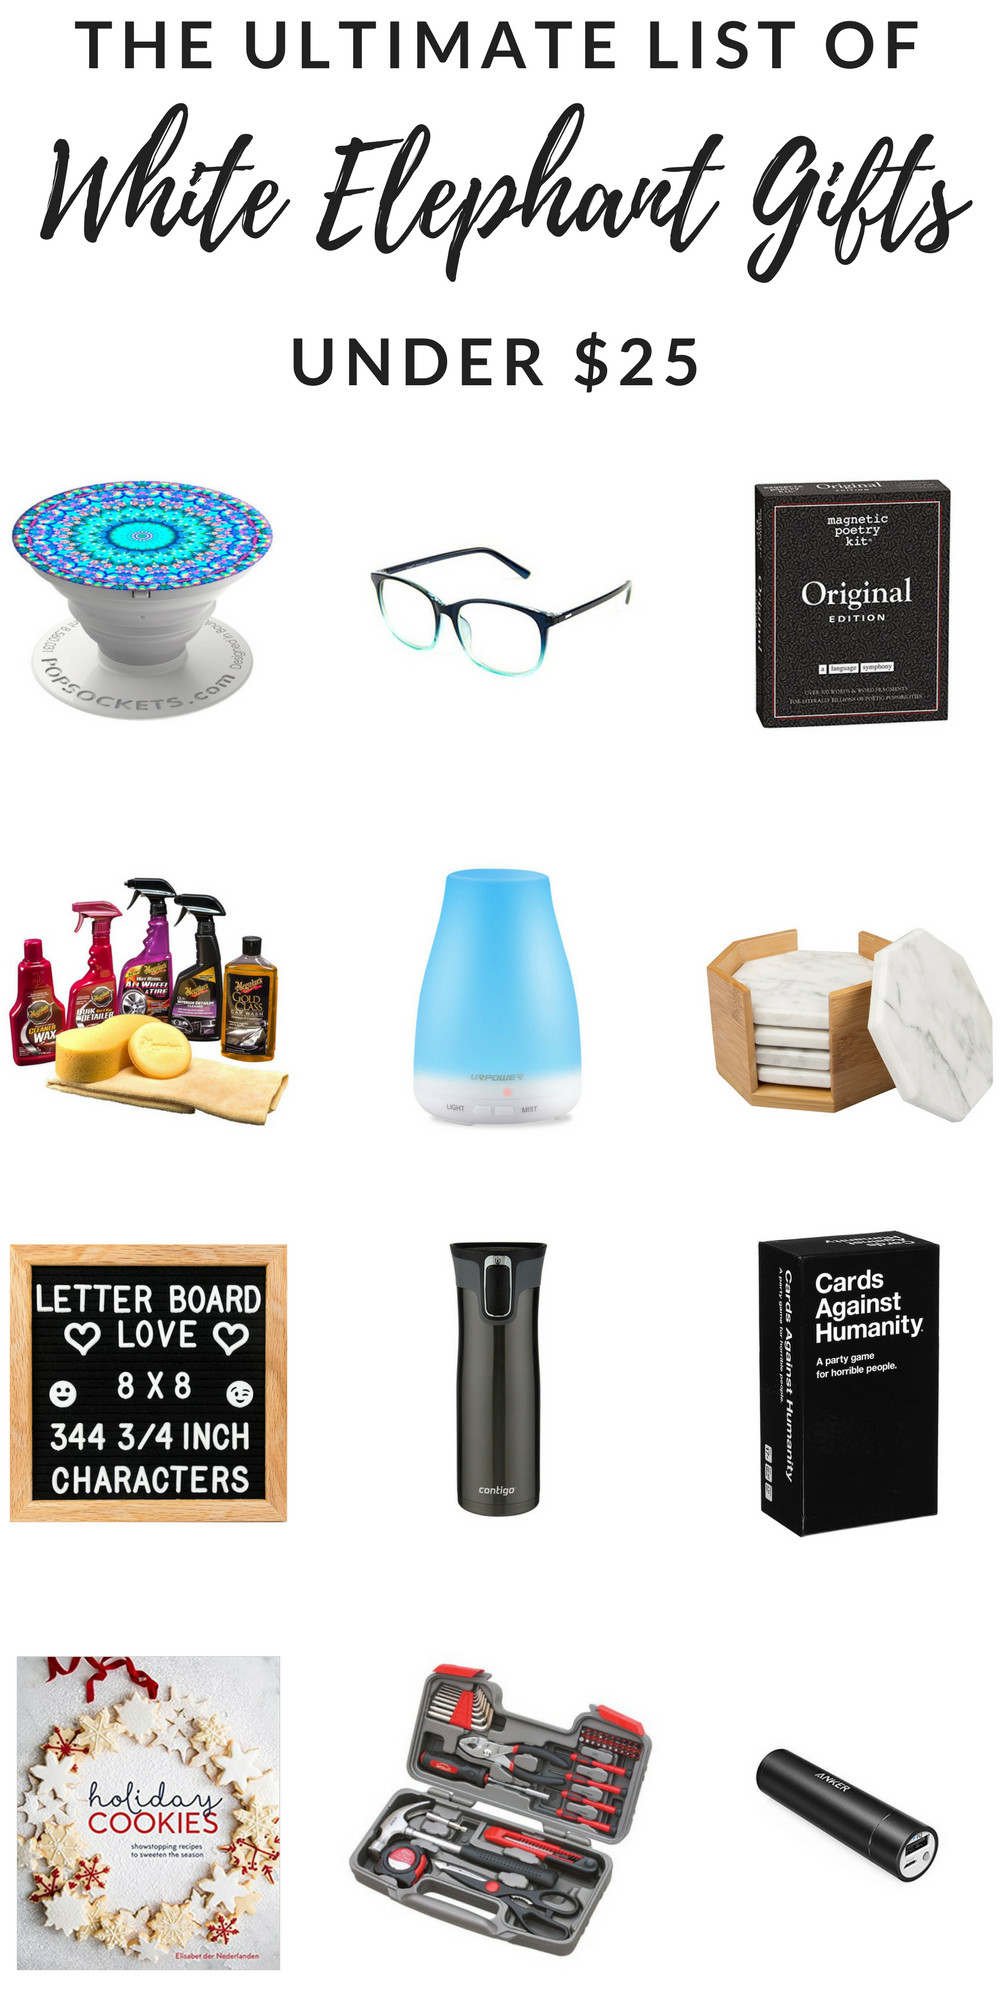 Unisex Holiday Gift Ideas
 The Ultimate List of White Elephant Gifts Under $25